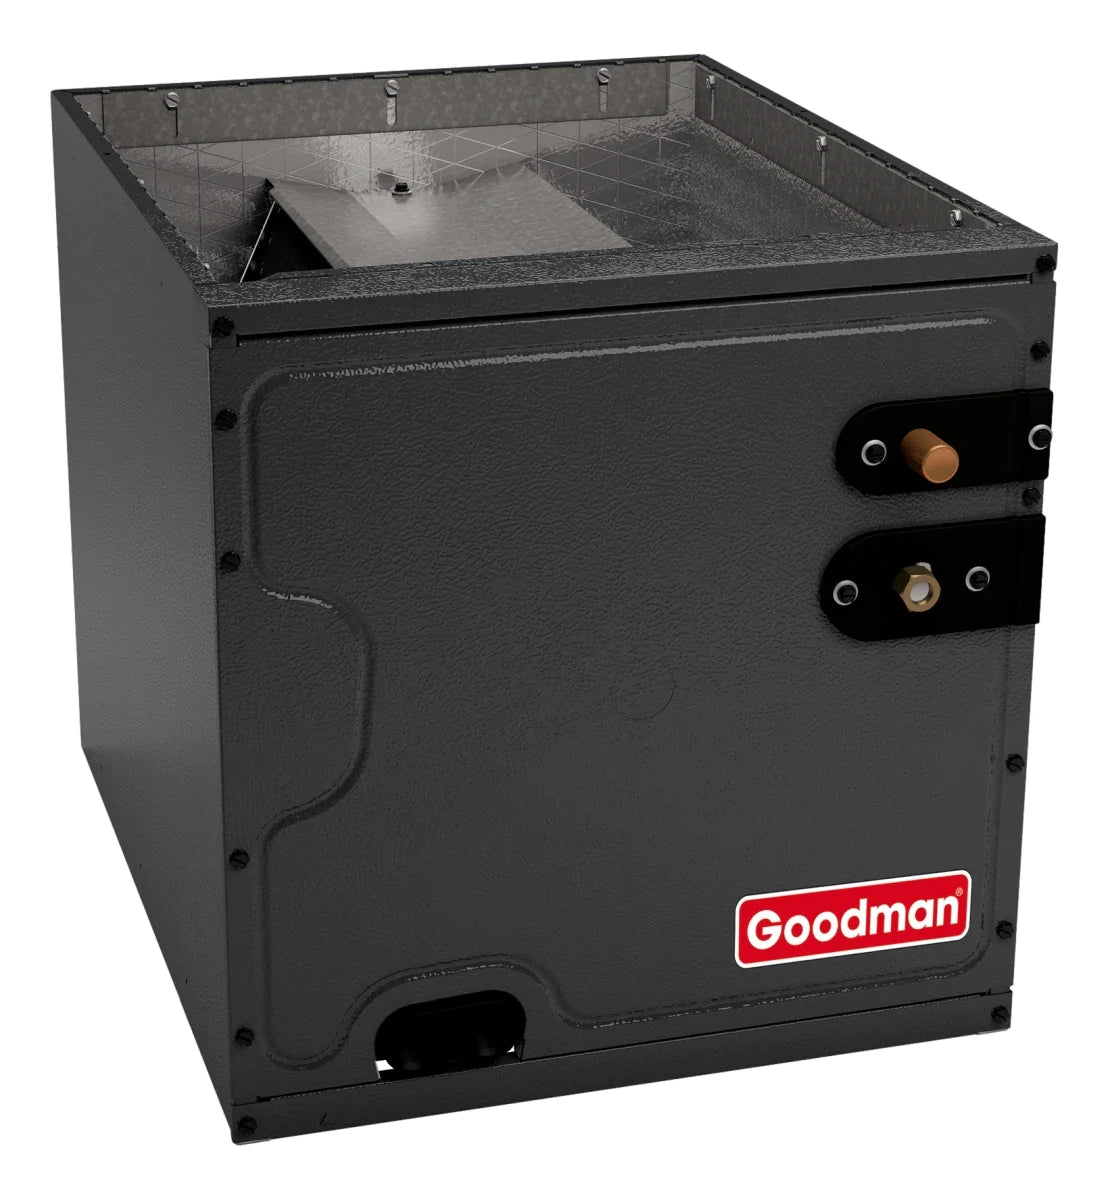 Goodman 1.5 TON 14.5 SEER2 Downflow AC system with 80% AFUE 60k BTU 2 stage Furnace (GSXH501810, CAPTA1818A4, GC9C800603AN)